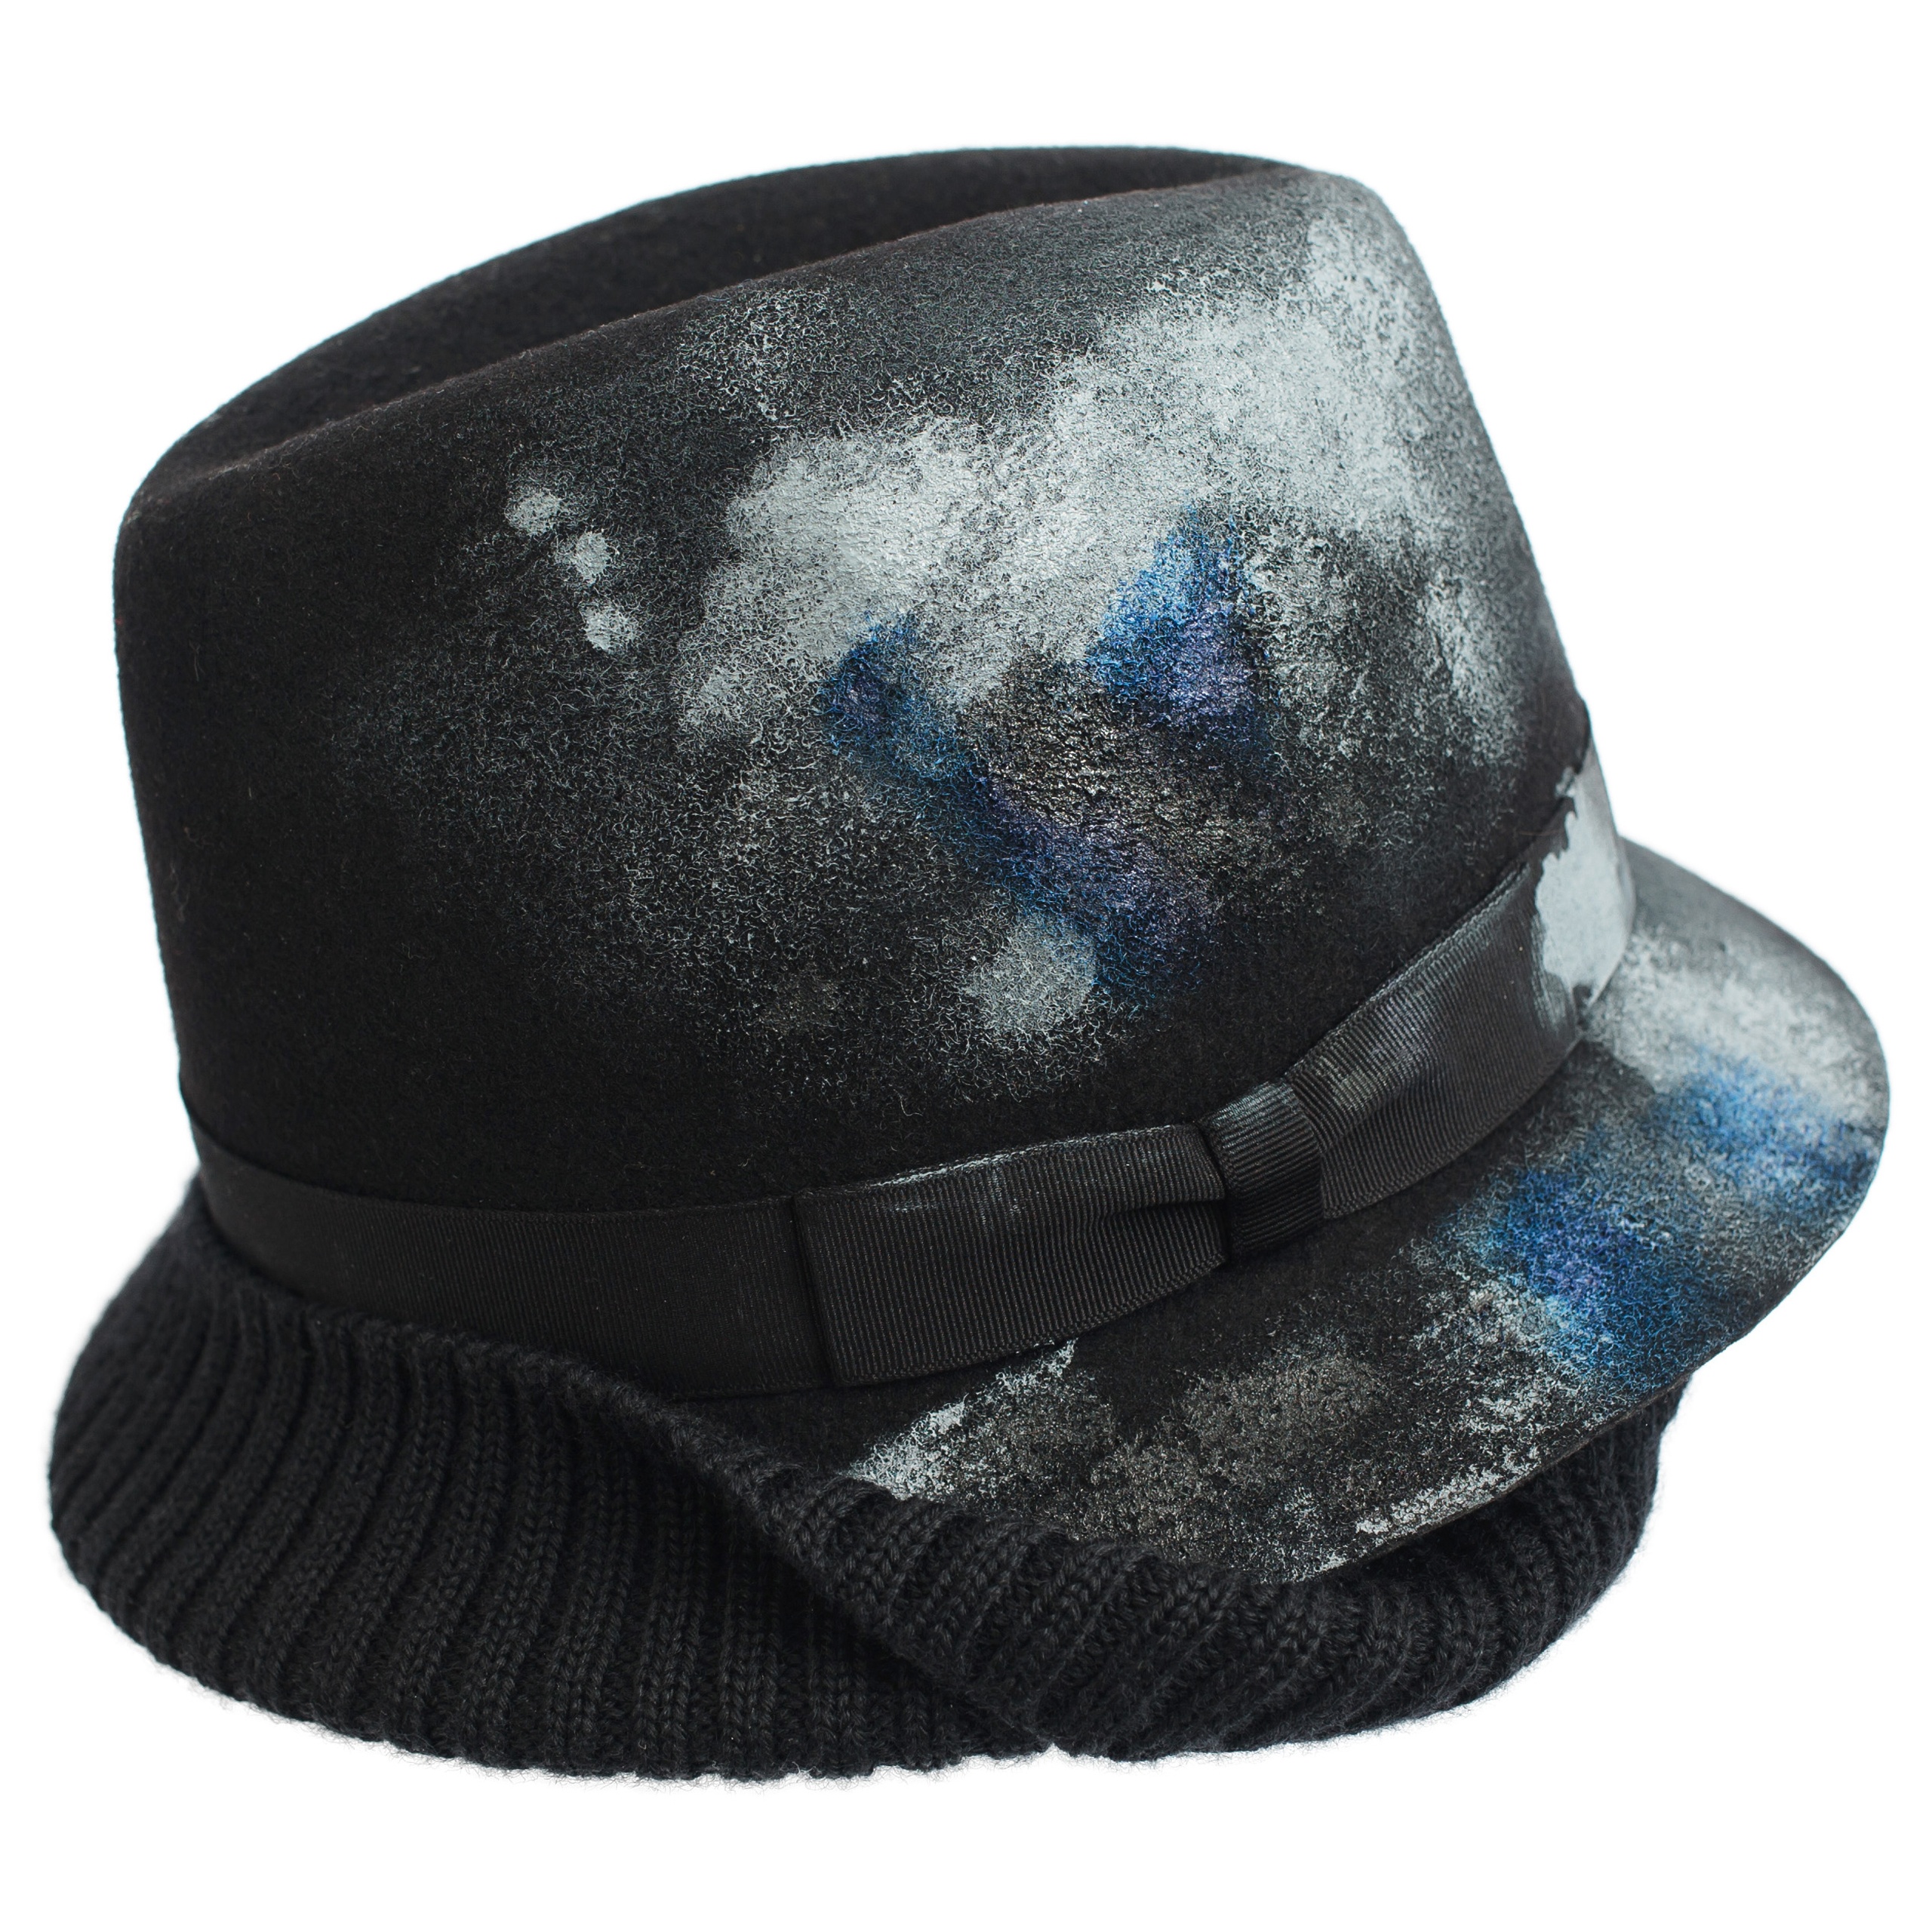 BLACK HAT WITH PAINT MARKS - 1